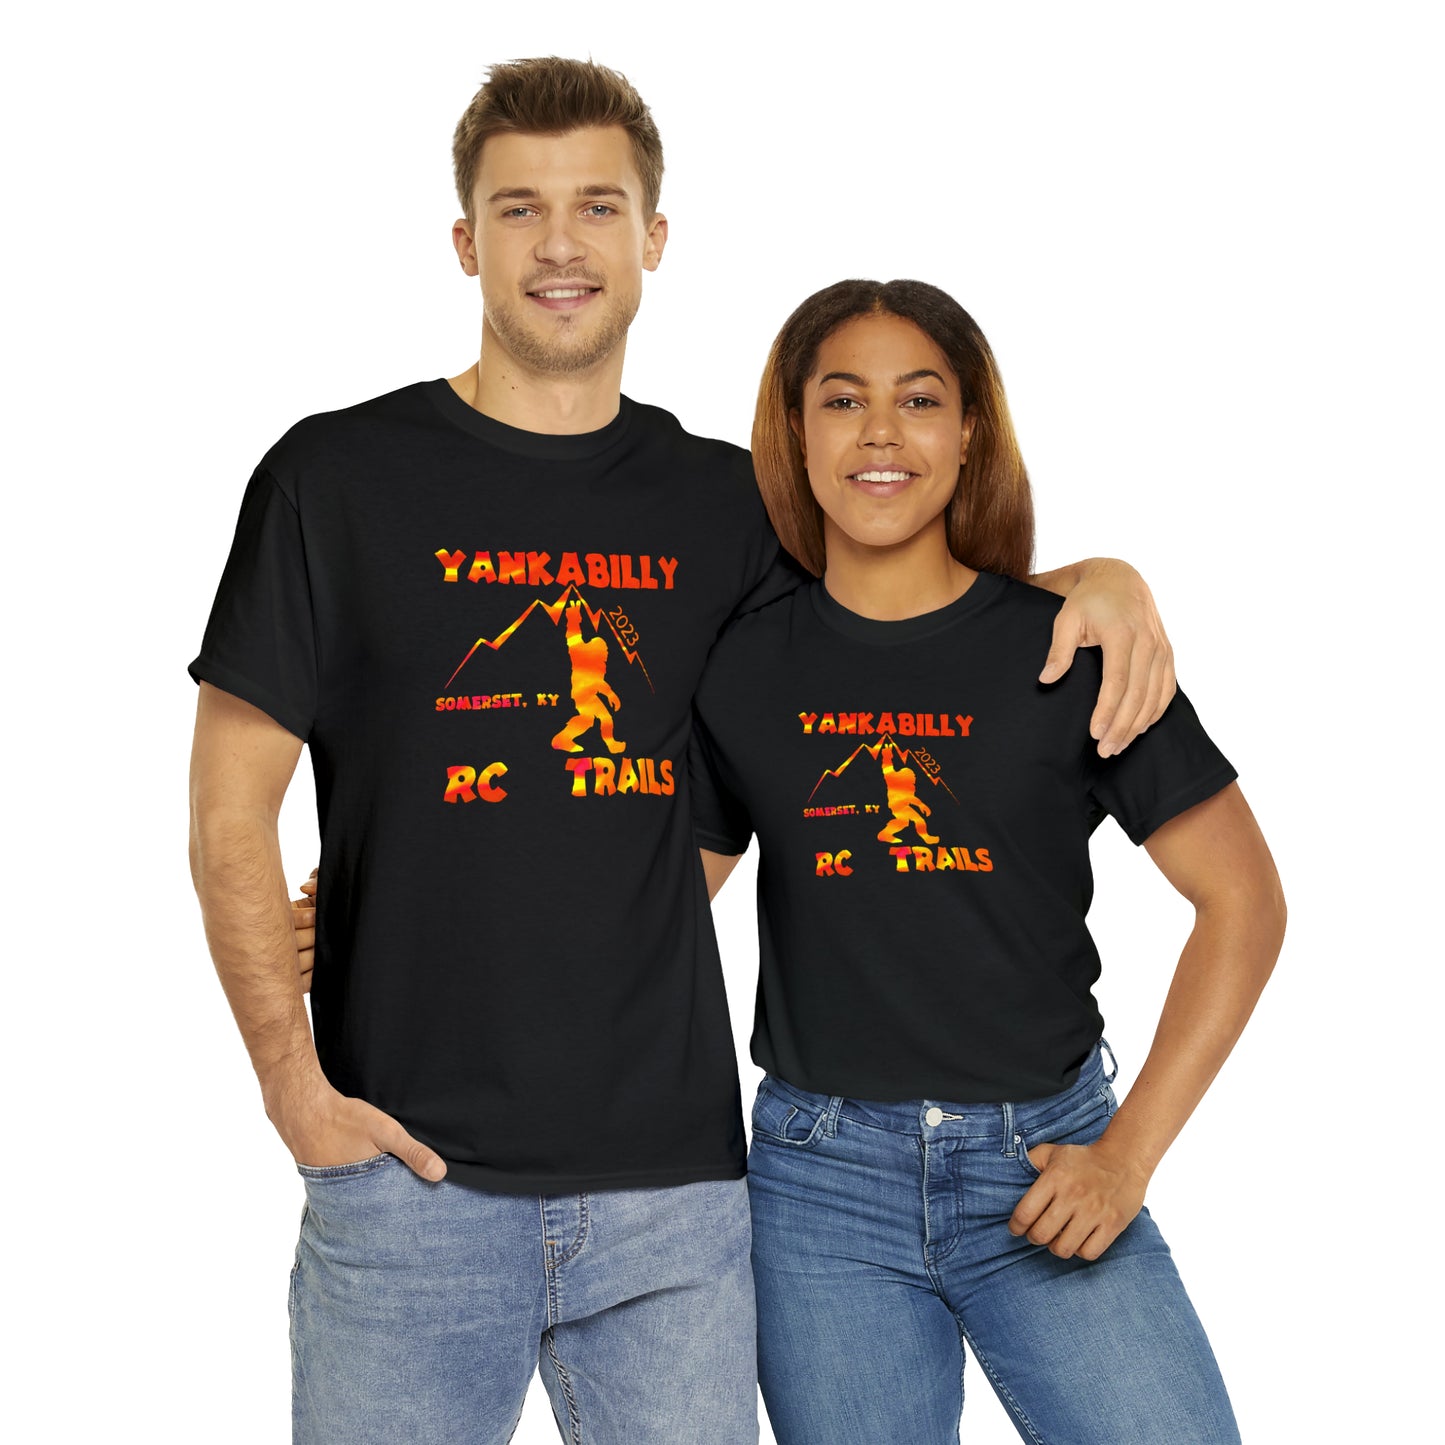 Yankabilly 2023 DinoRc logo Front and Back DinoRc Logo T-Shirt S-5x 5 colors